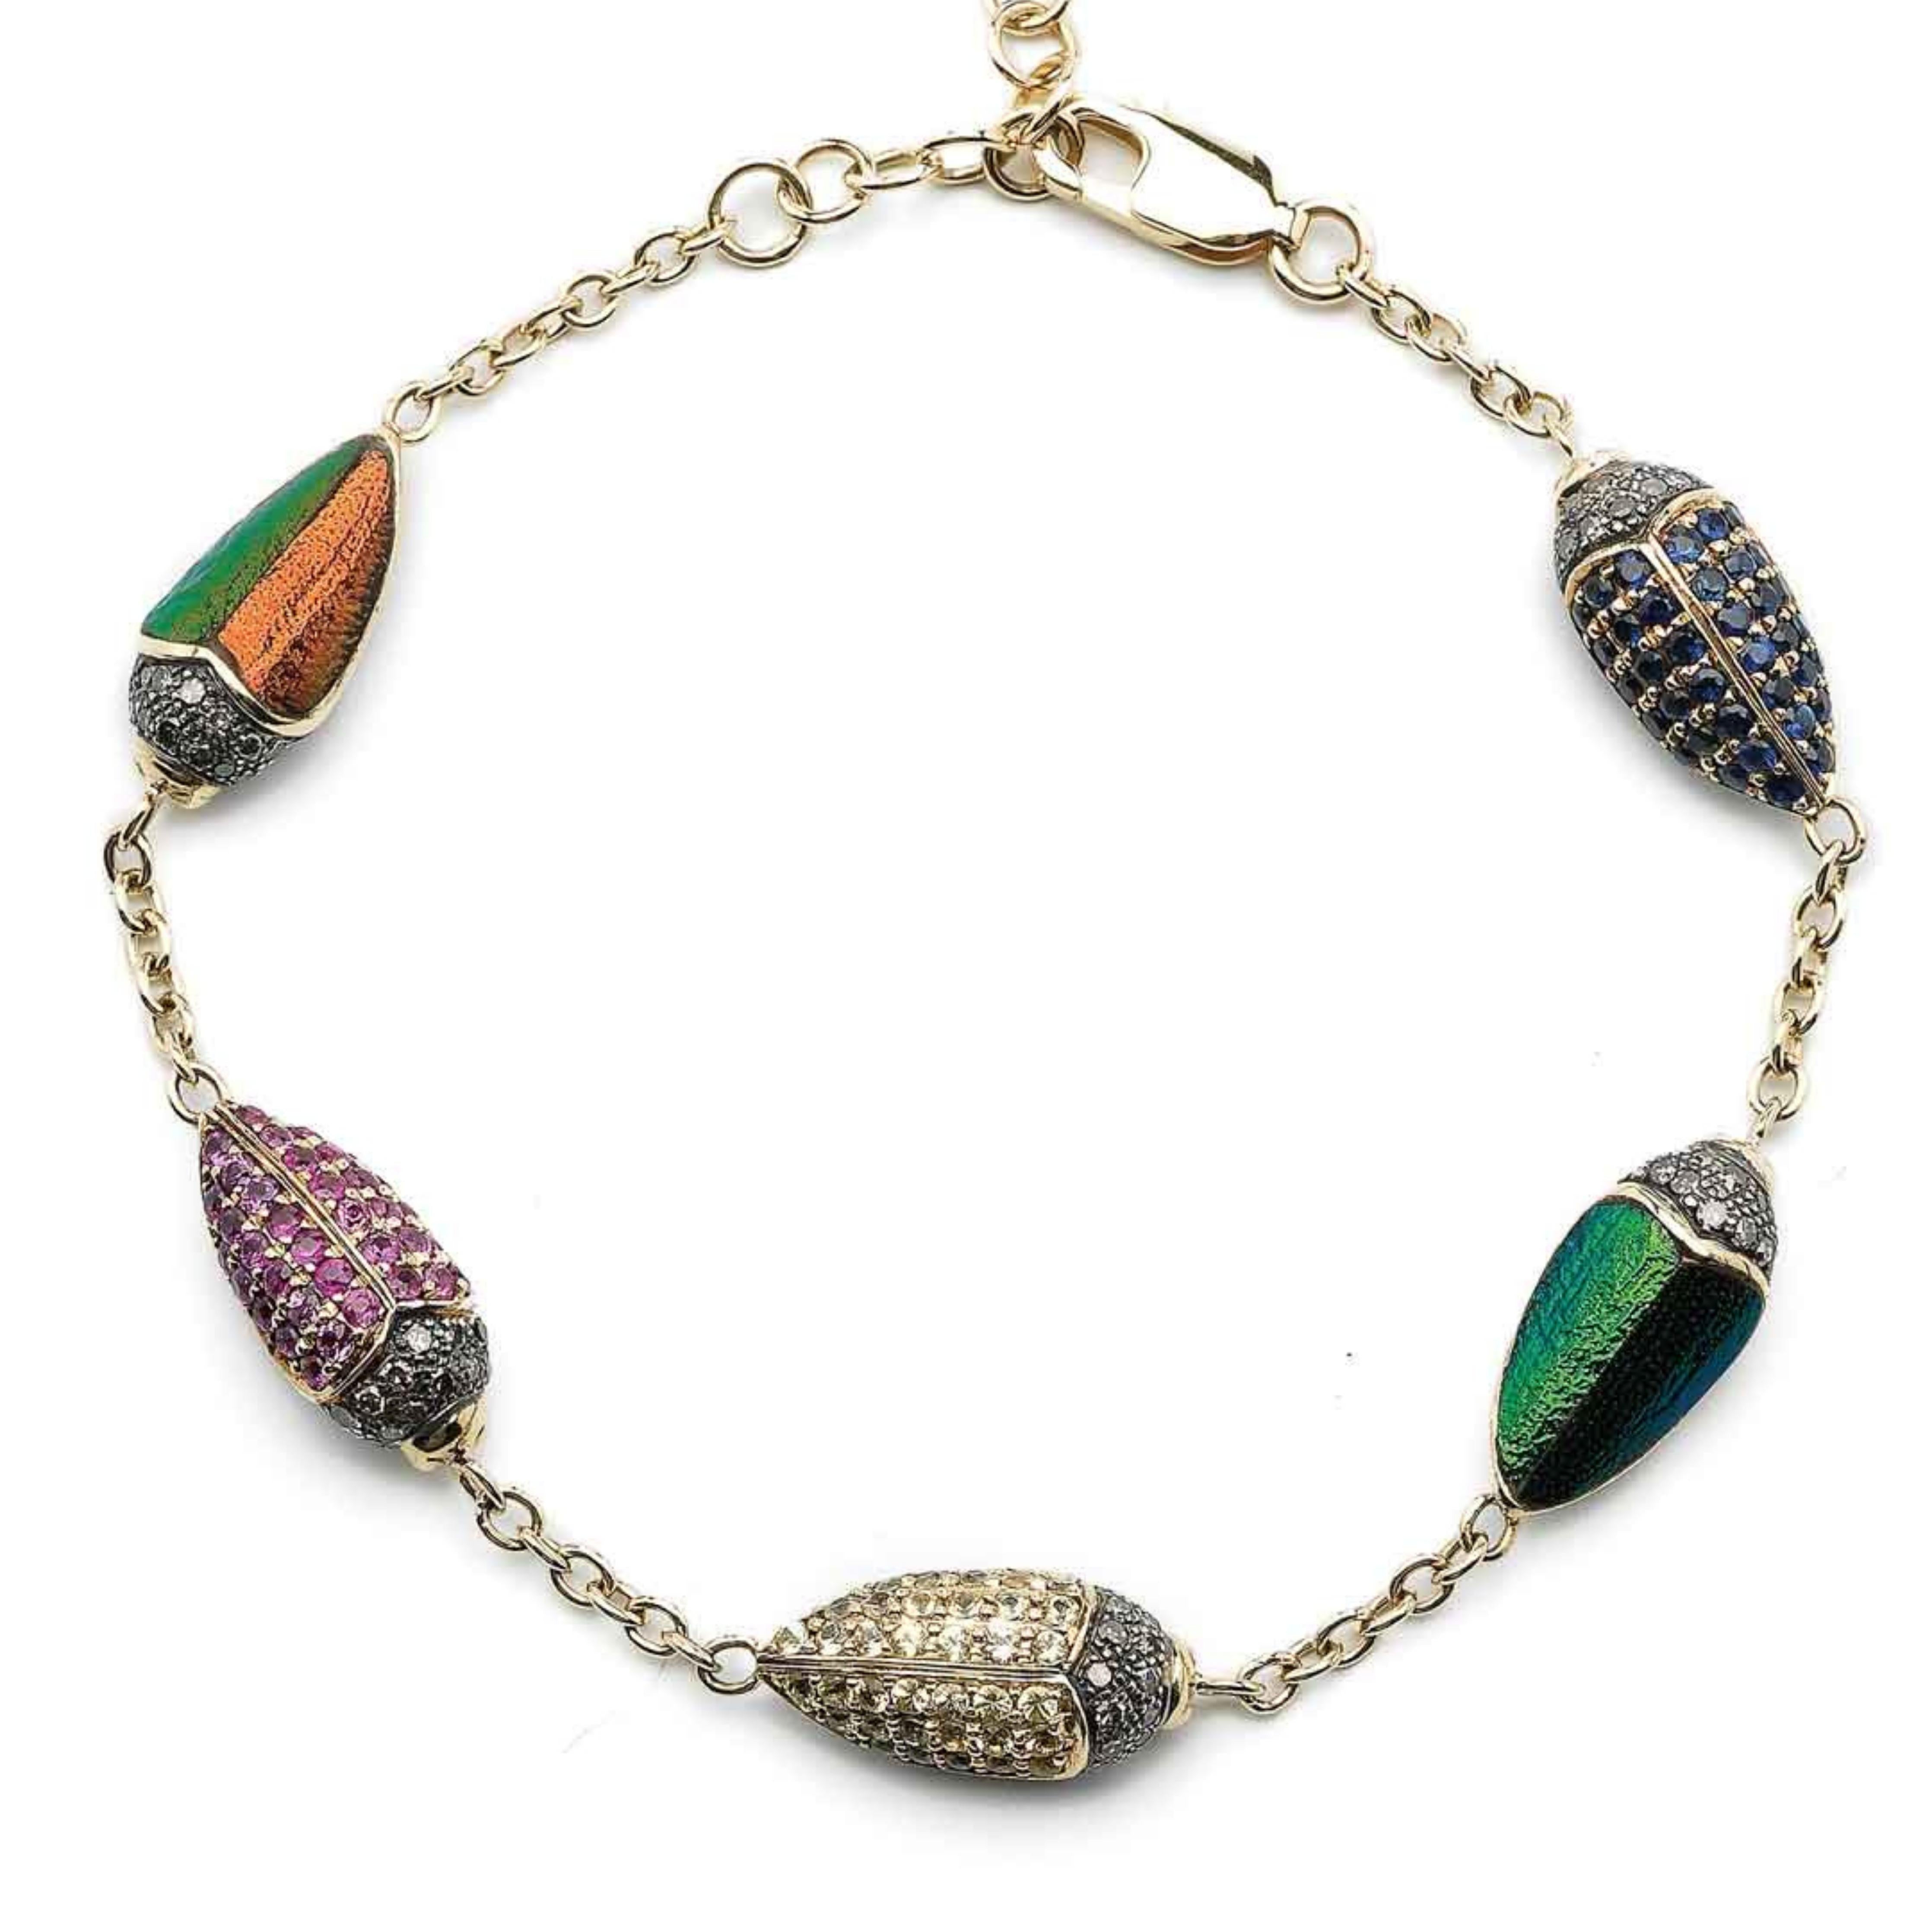 Bibi van der Velden Scarab Multi Color Bracelet. Five scarabs charms connected with 18k yellow gold and sterling silver chains form this charm bracelet.  Each scarabs featured here are set with real scarab wings, brown diamonds, blue sapphires, and tsavorites. Bracelet shown from top view.